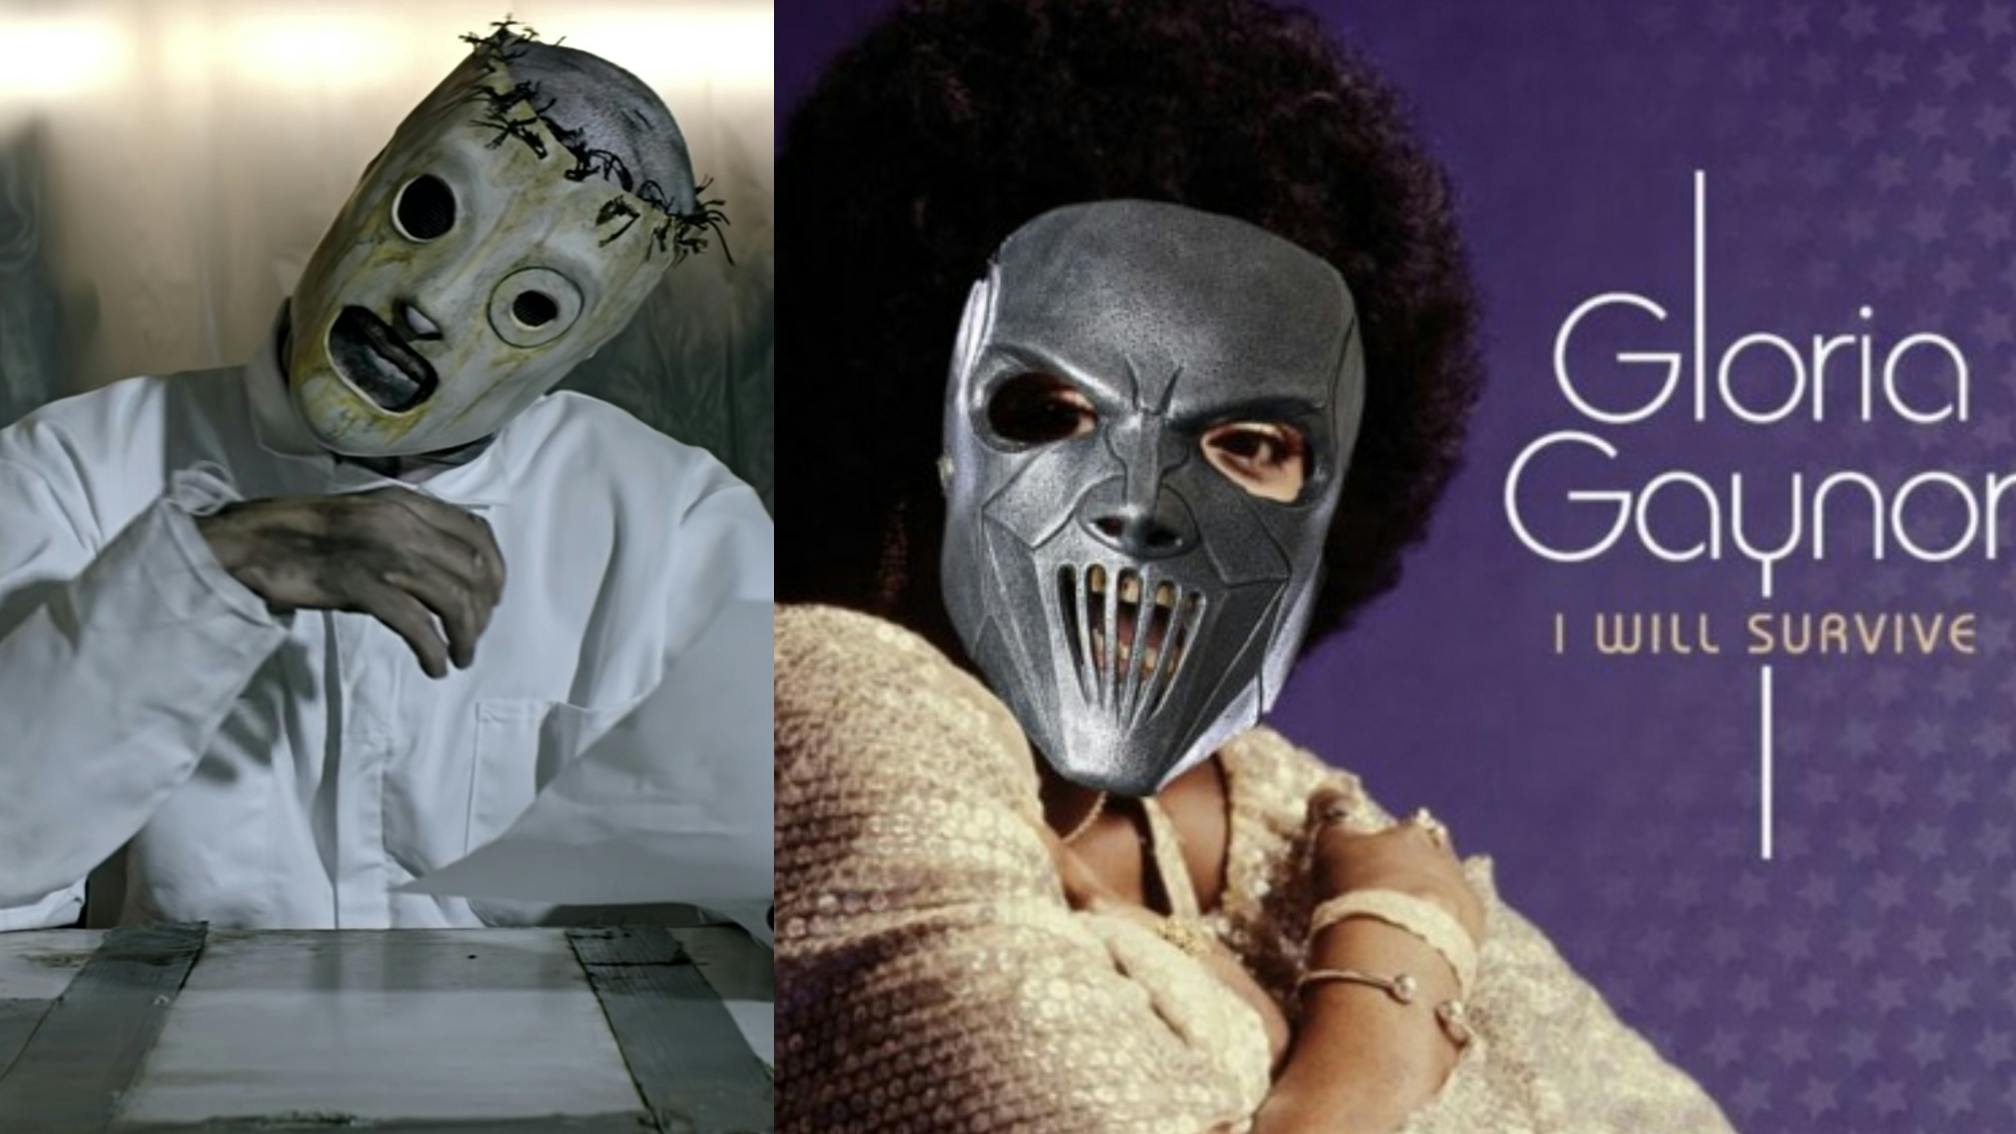 This mash-up of Slipknot's The Devil In I and Gloria Gaynor's I Will Survive is truly glorious